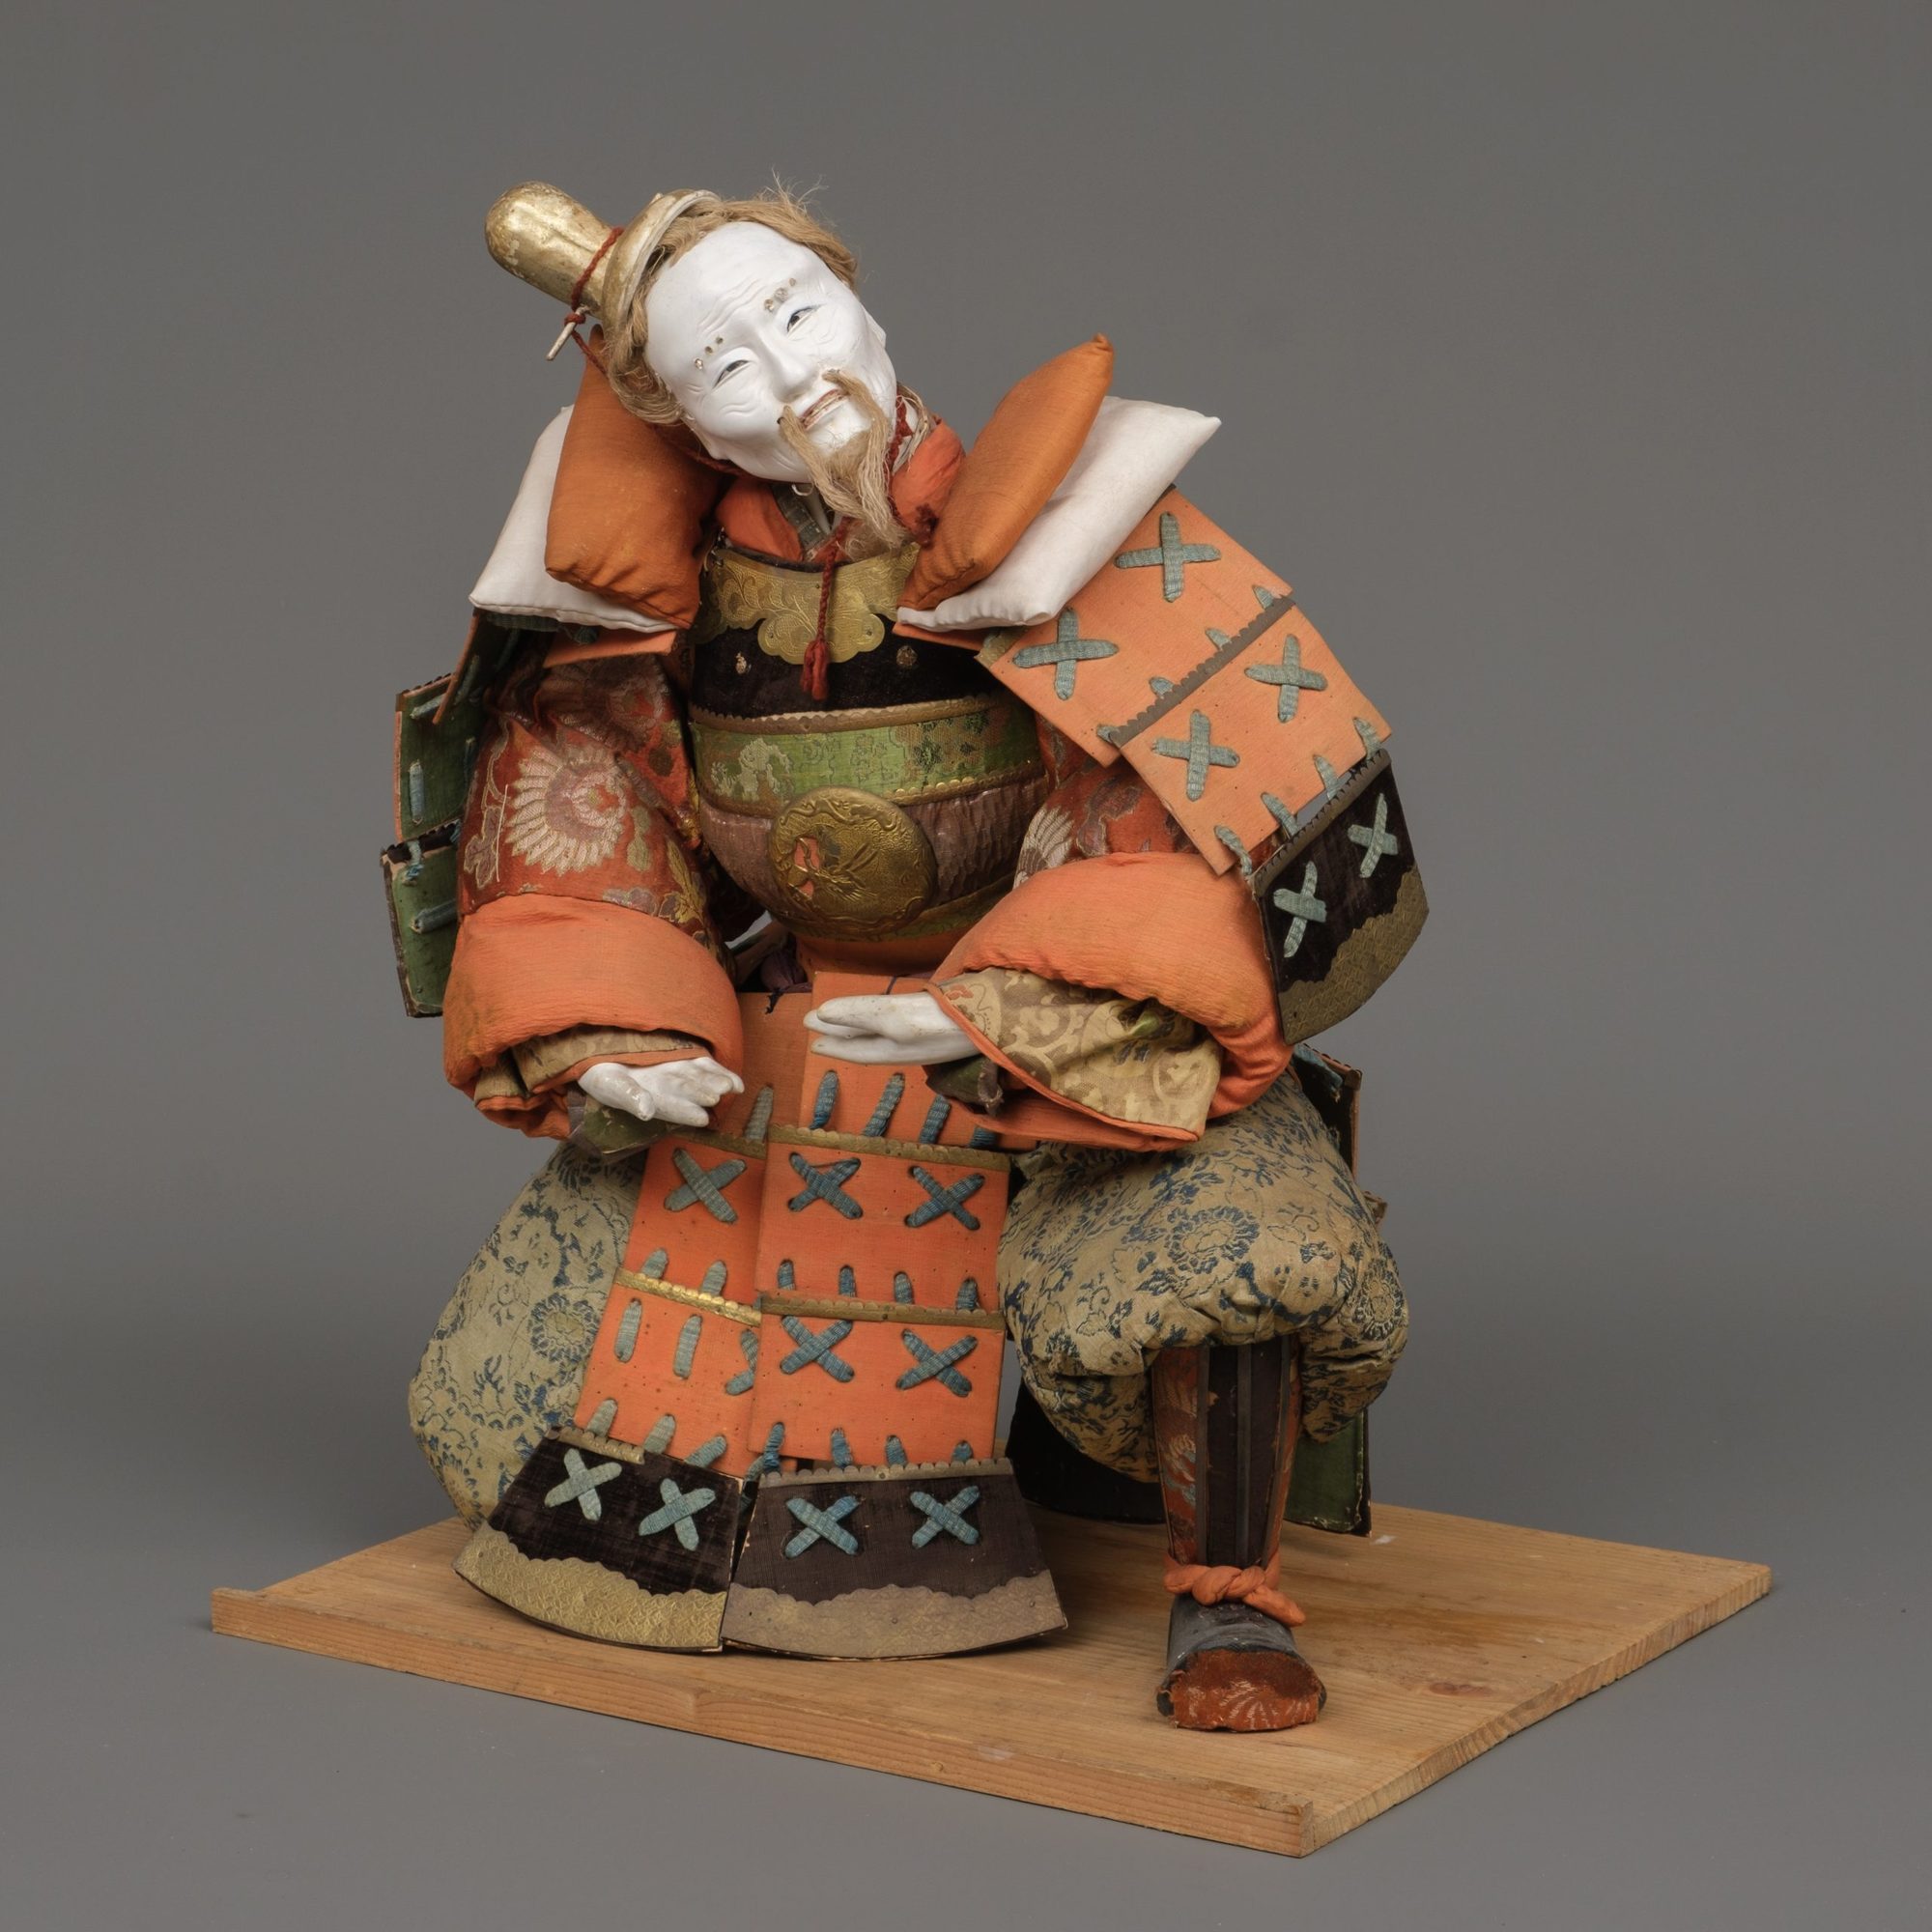 A LARGE JAPANESE HAND-CRAFTED WARRIOR DOLL, 18TH CENTURY - Image 2 of 6